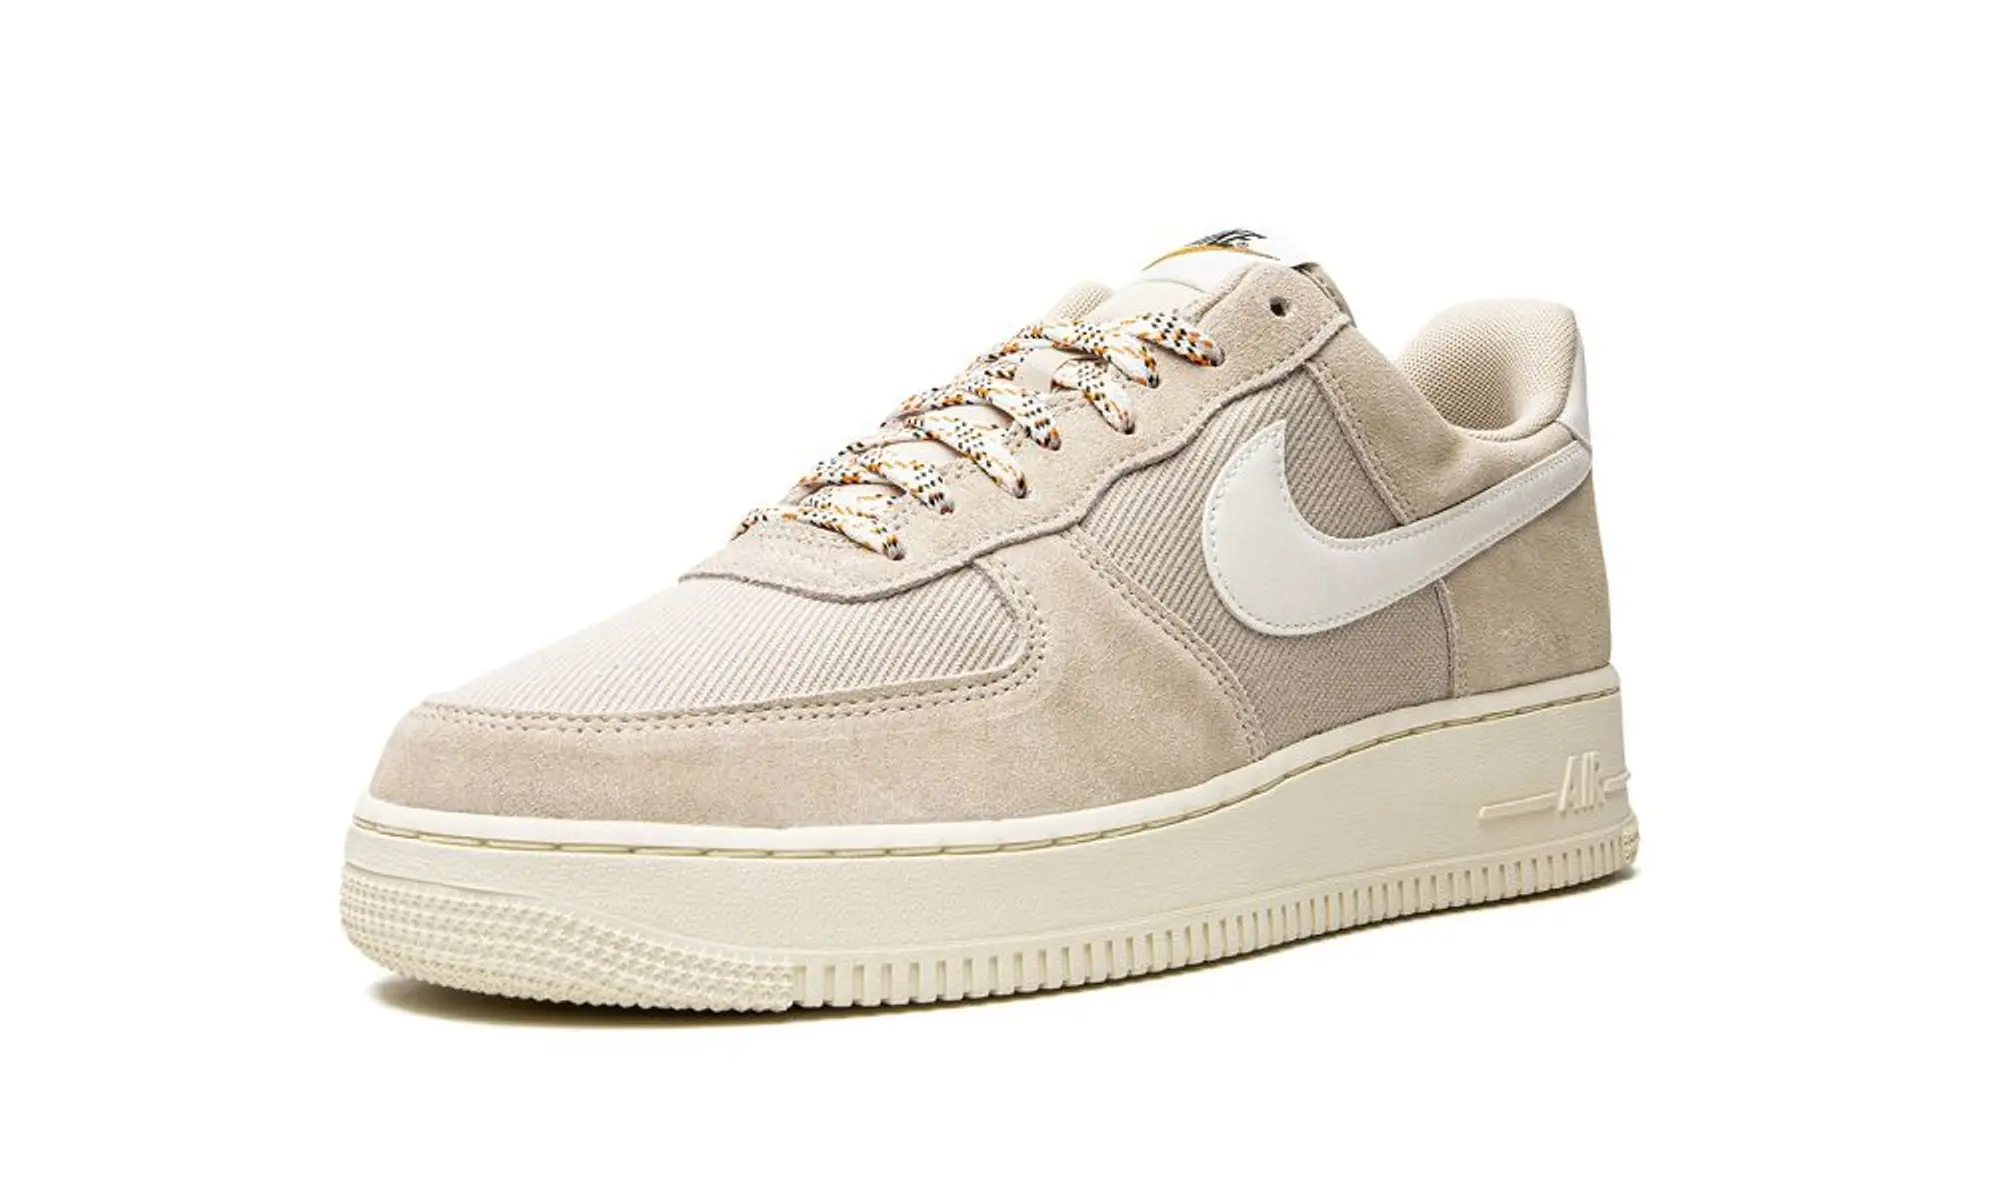 Nike Air Force 1 Certified Fresh Shoes